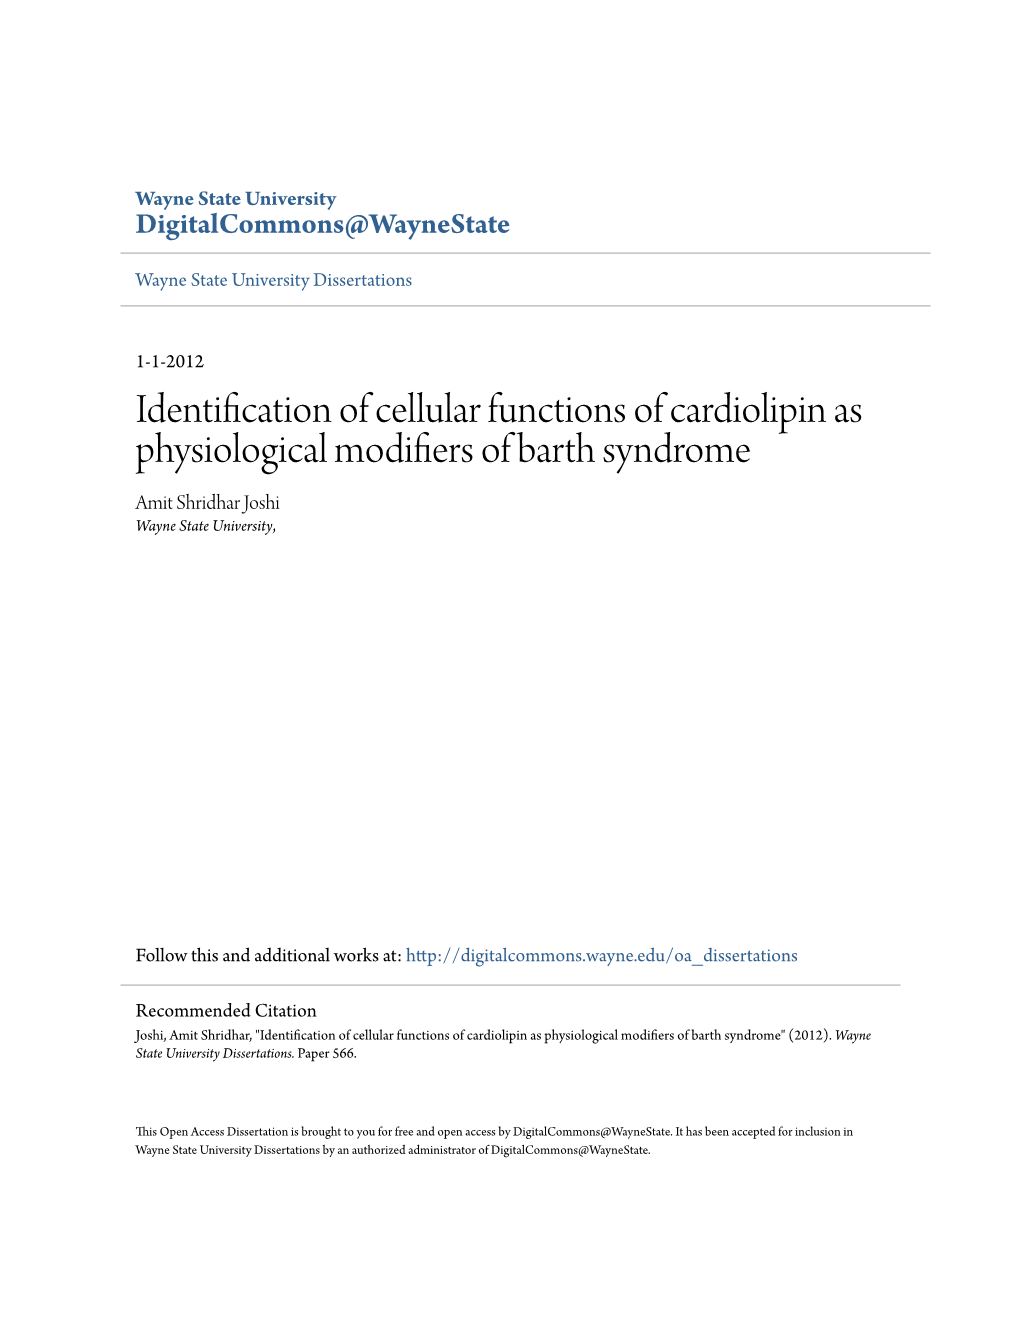 Identification of Cellular Functions of Cardiolipin As Physiological Modifiers of Barth Syndrome Amit Shridhar Joshi Wayne State University